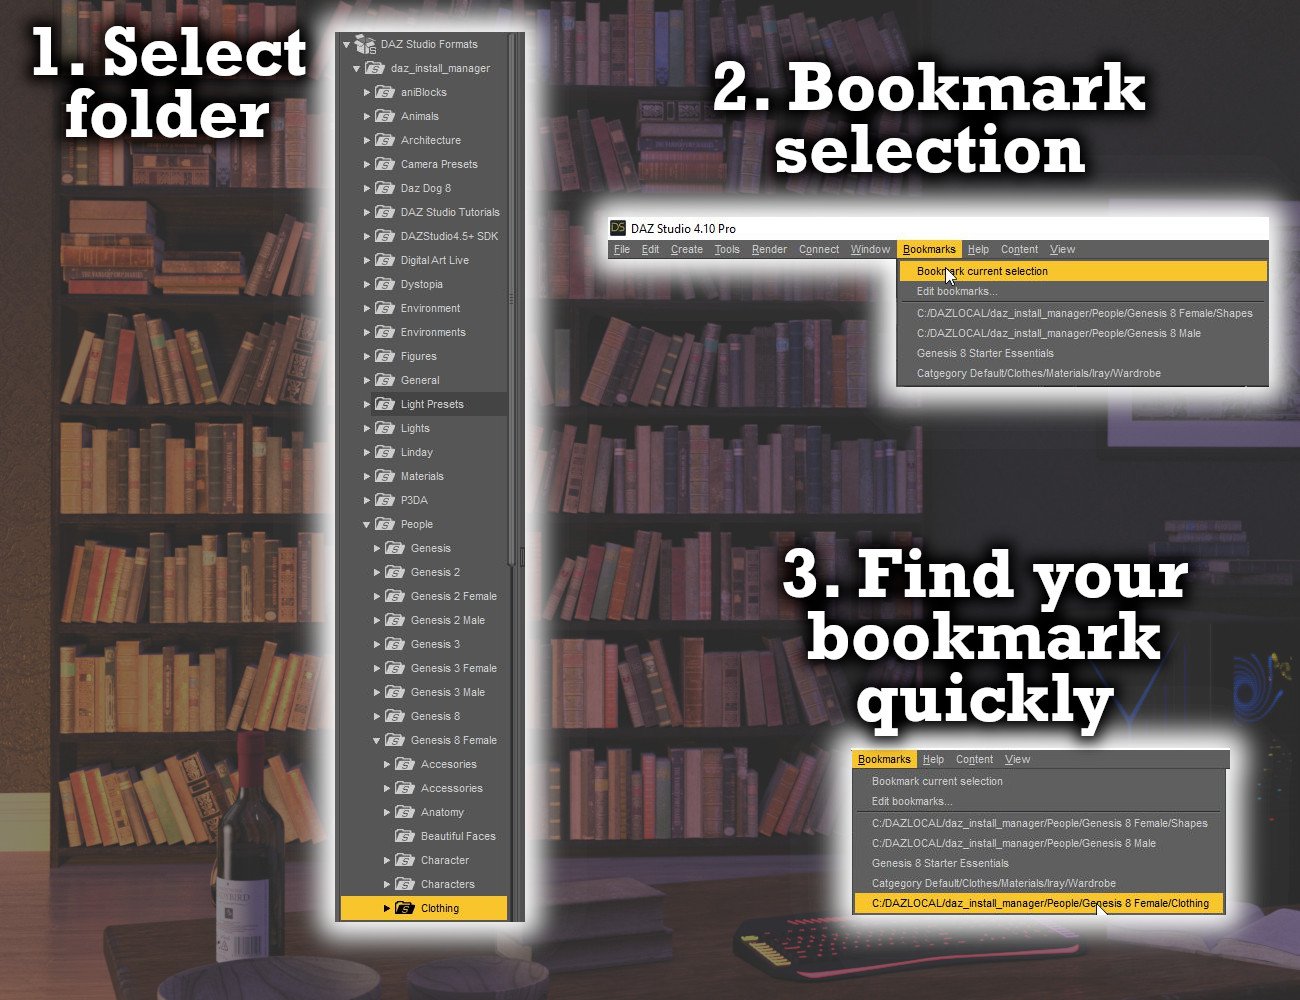 MF Content Bookmarks by: ManFriday, 3D Models by Daz 3D